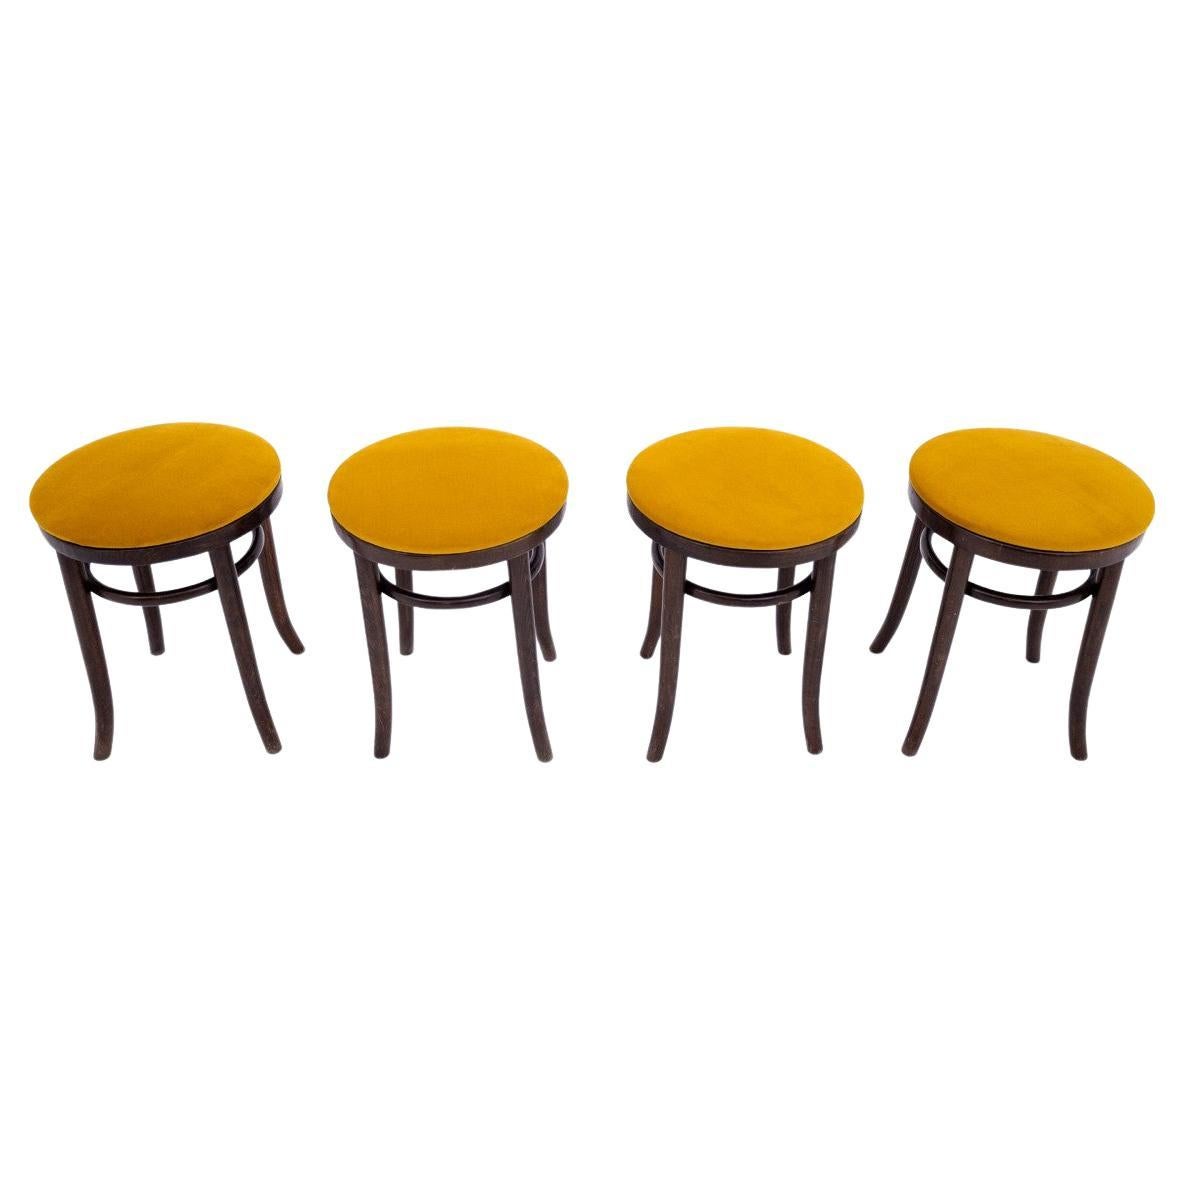 Set of four Thonet stools, Germany, 1930s. After renovation.8608 For Sale